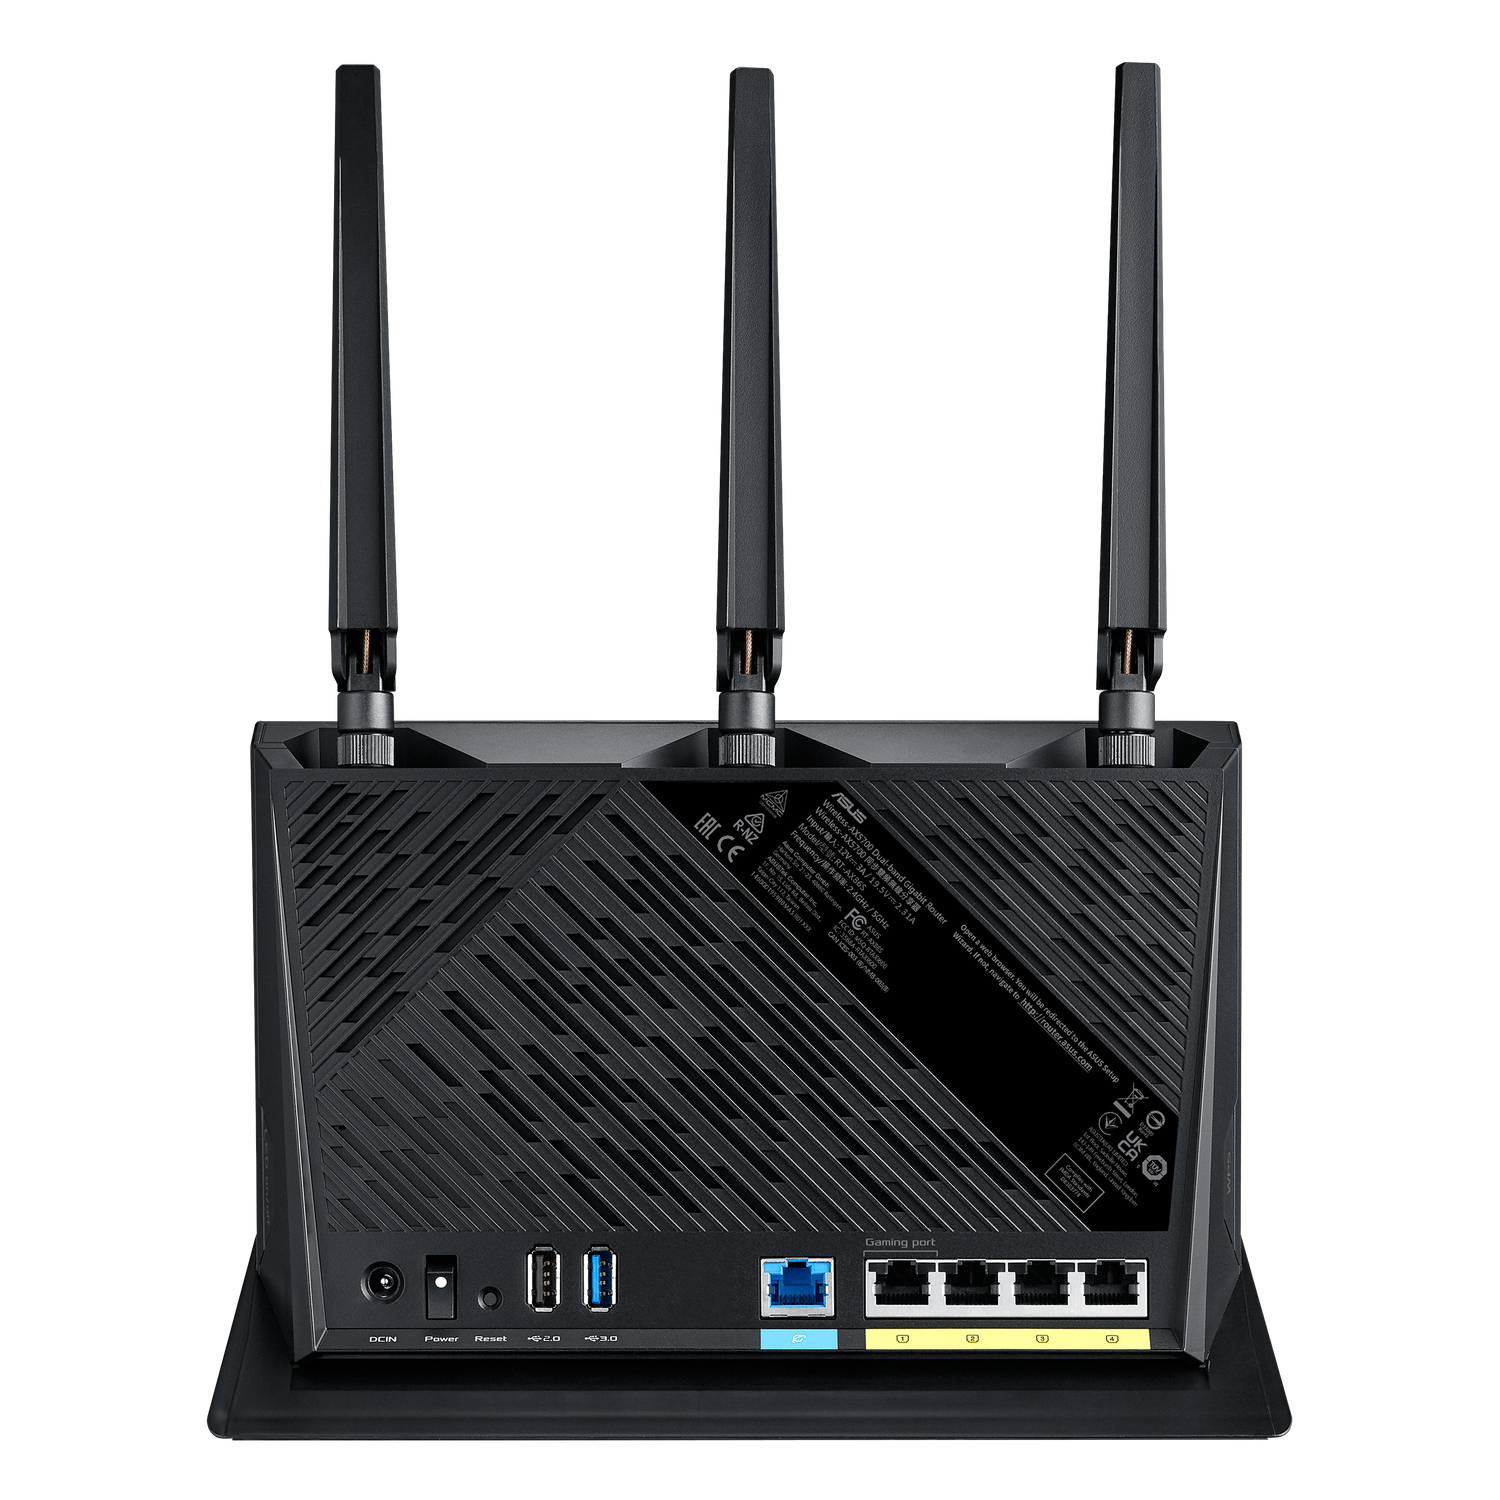 ASUS RT-AX86S WLAN AX5700 ROUTER